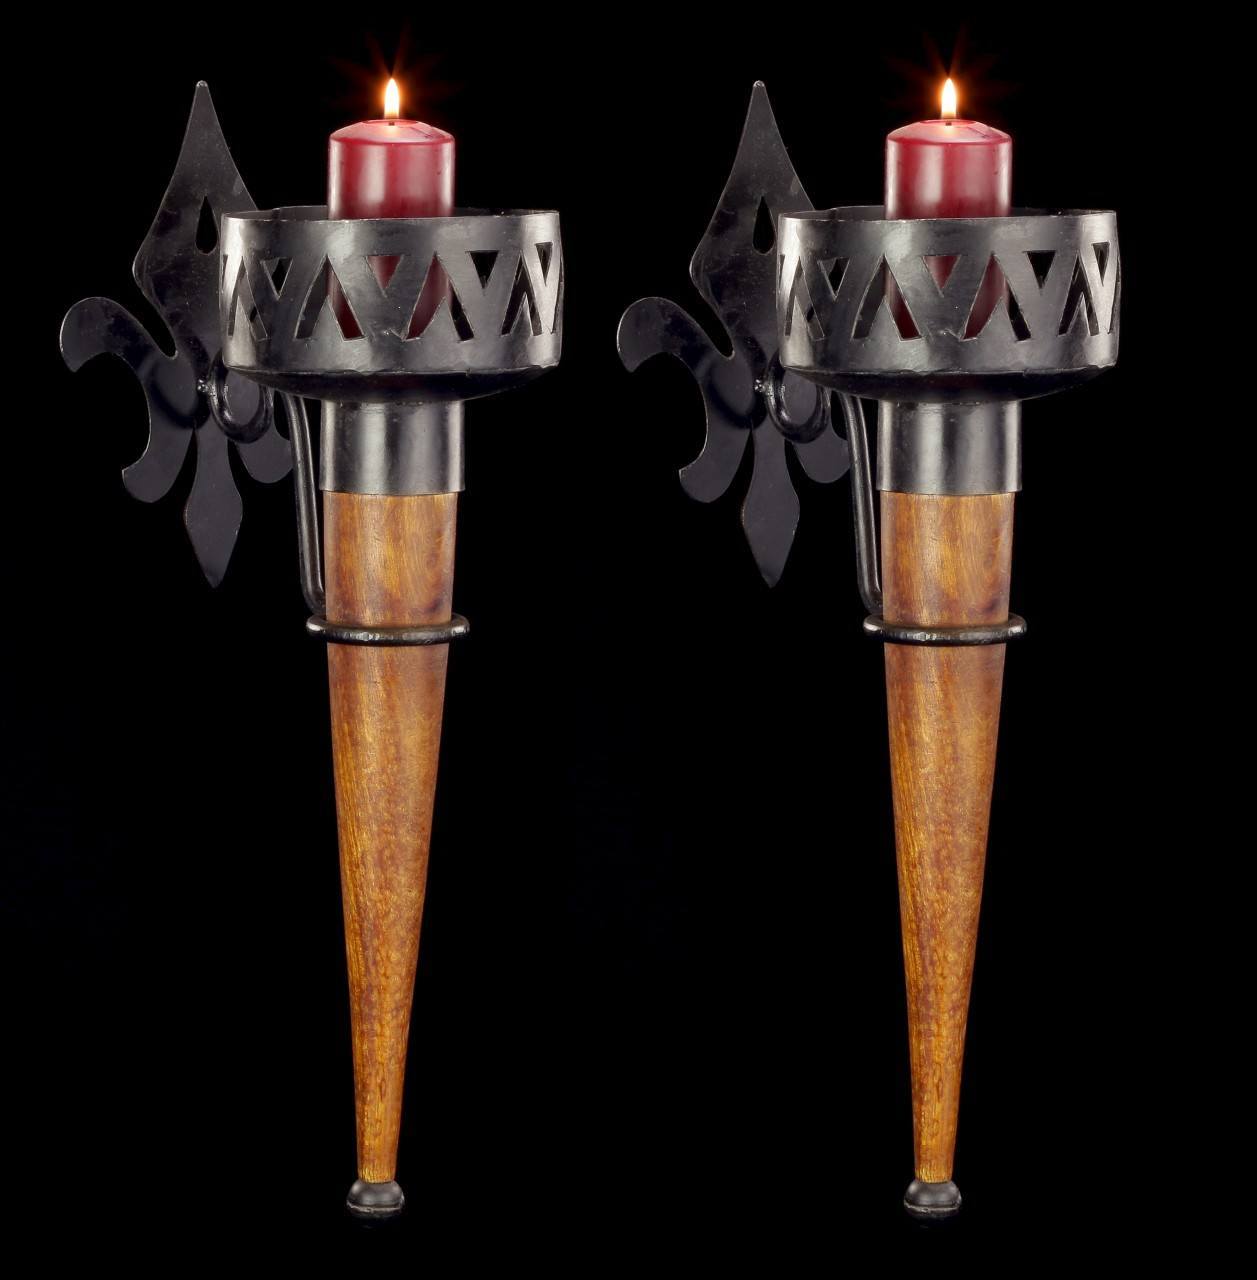 Medieval Wall Torches - Slim with Wooden Handle - Set of 2